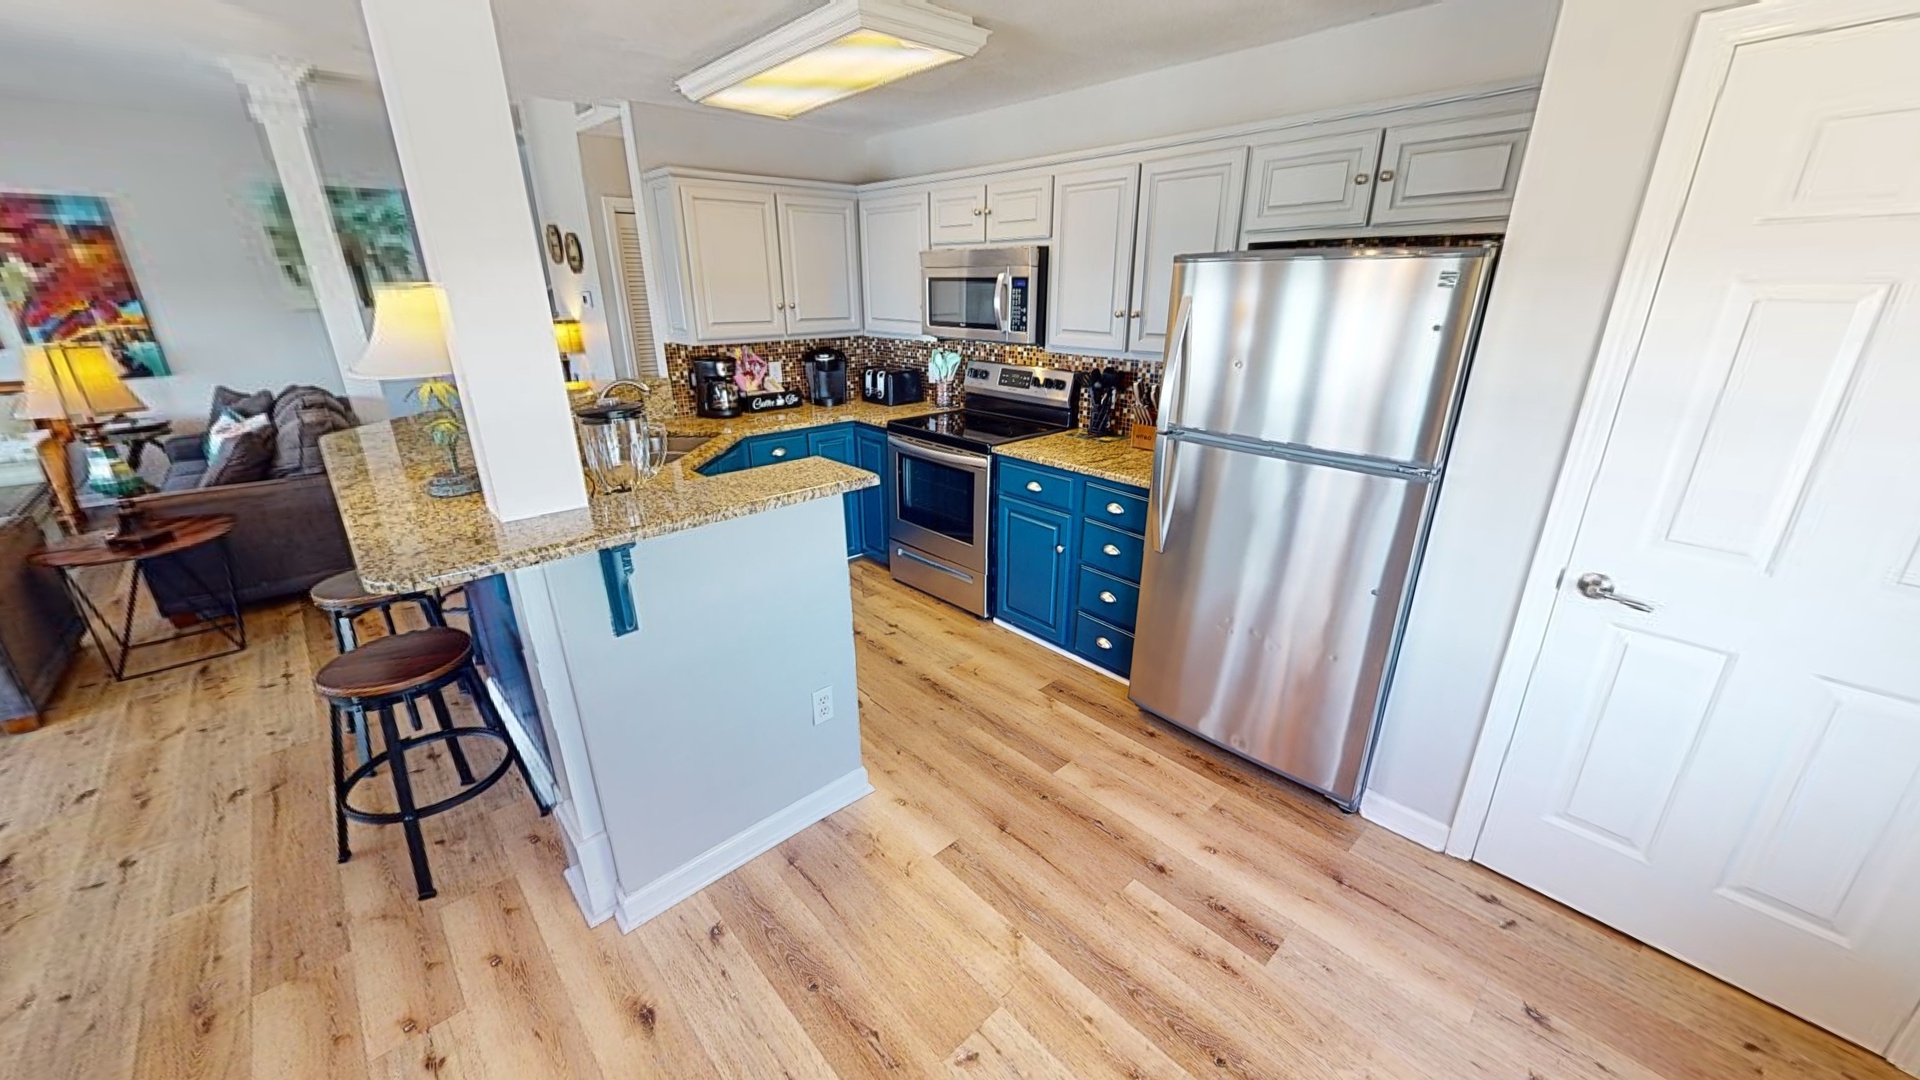 Updated kitchen with stainless appliances, granite countertops and tile backsplash